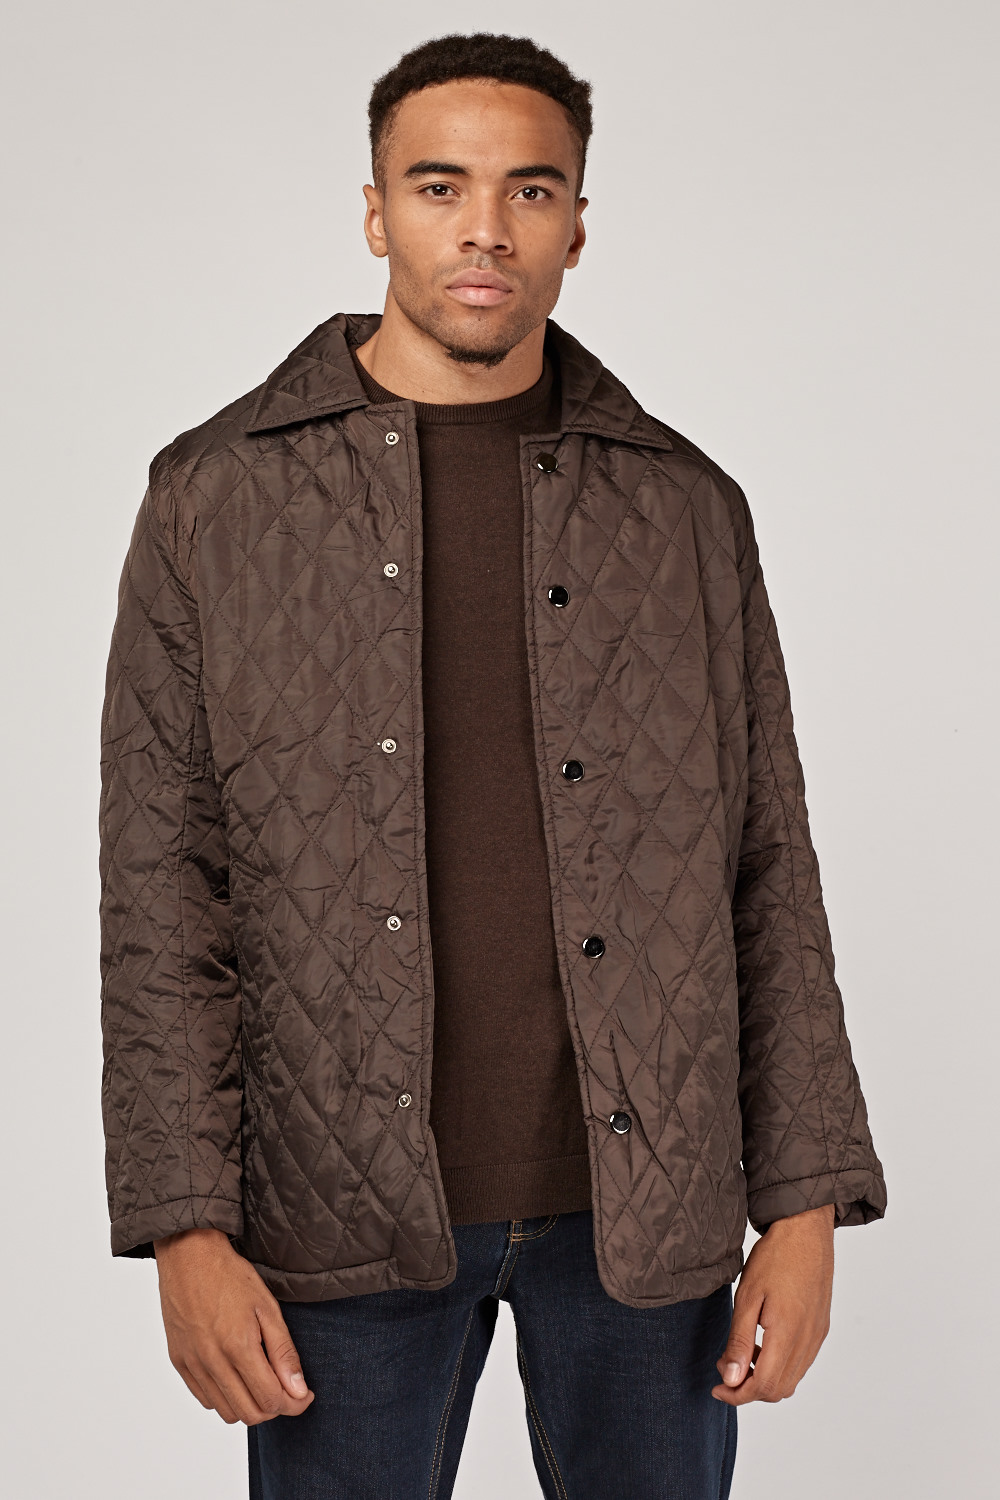 Diamond Quilted Detachable Sleeve Jacket - Just $7